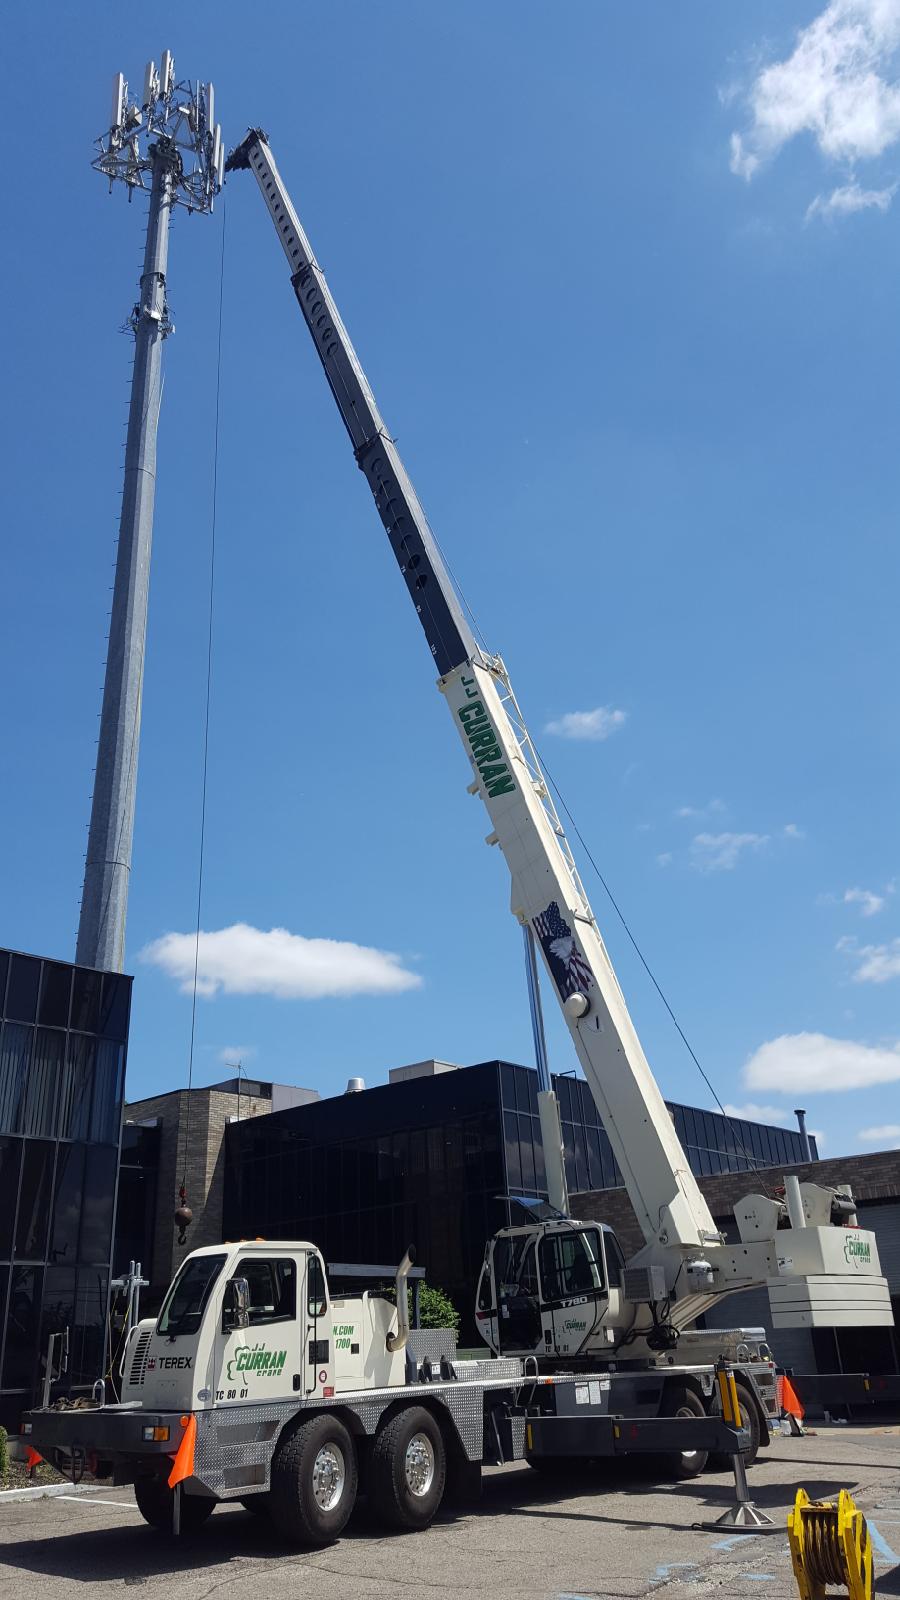 2018-06-06-cell-tower-se-michigan-terex